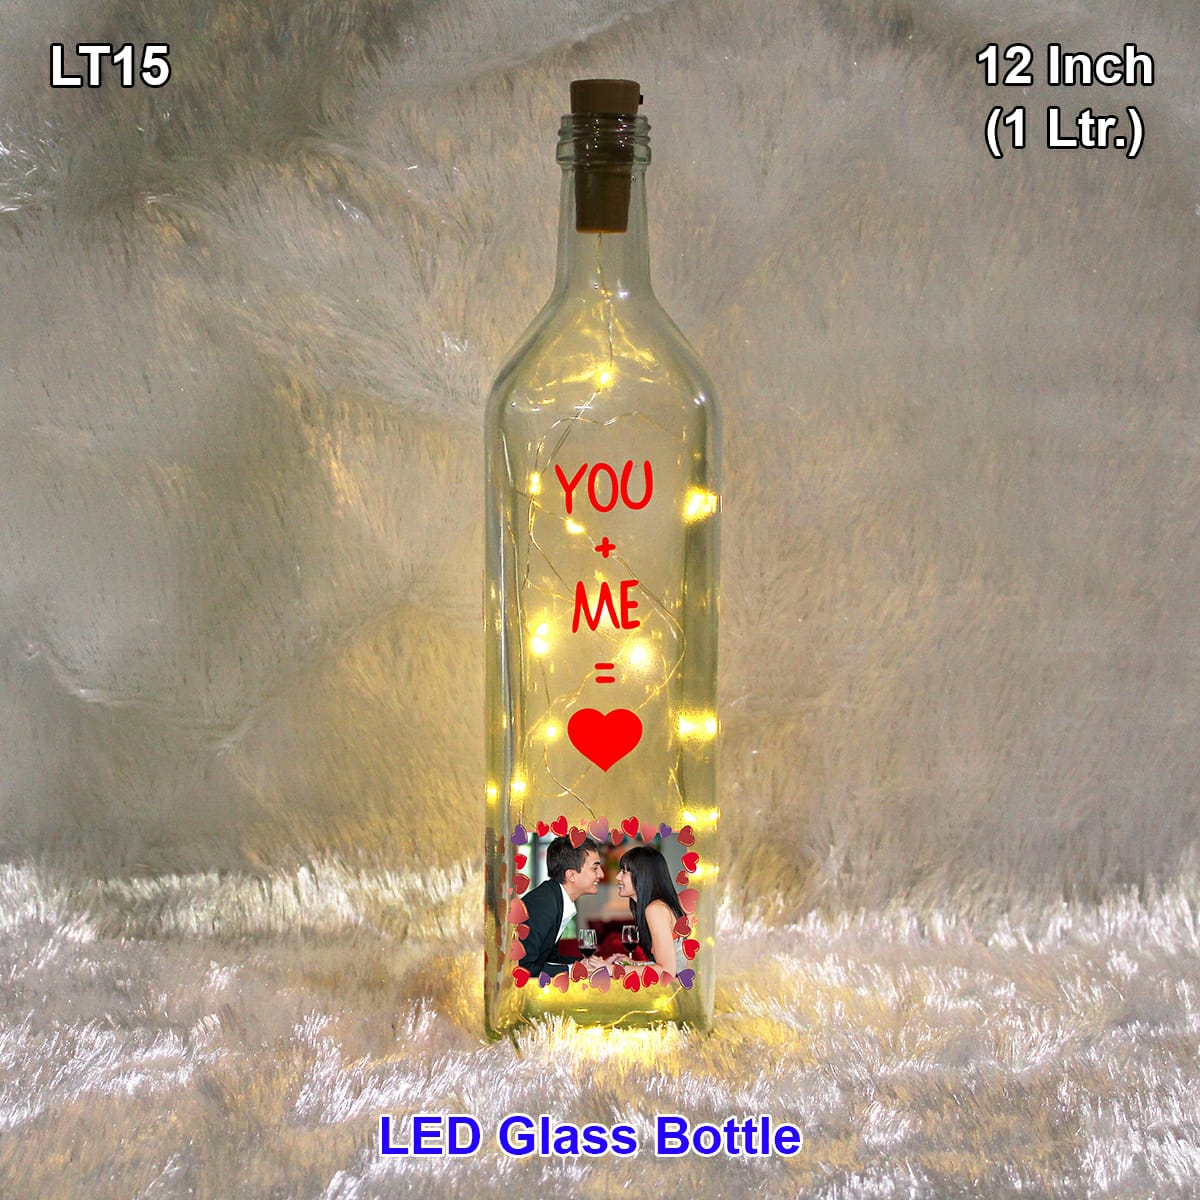 Customized bottle lamp for valentine day gift